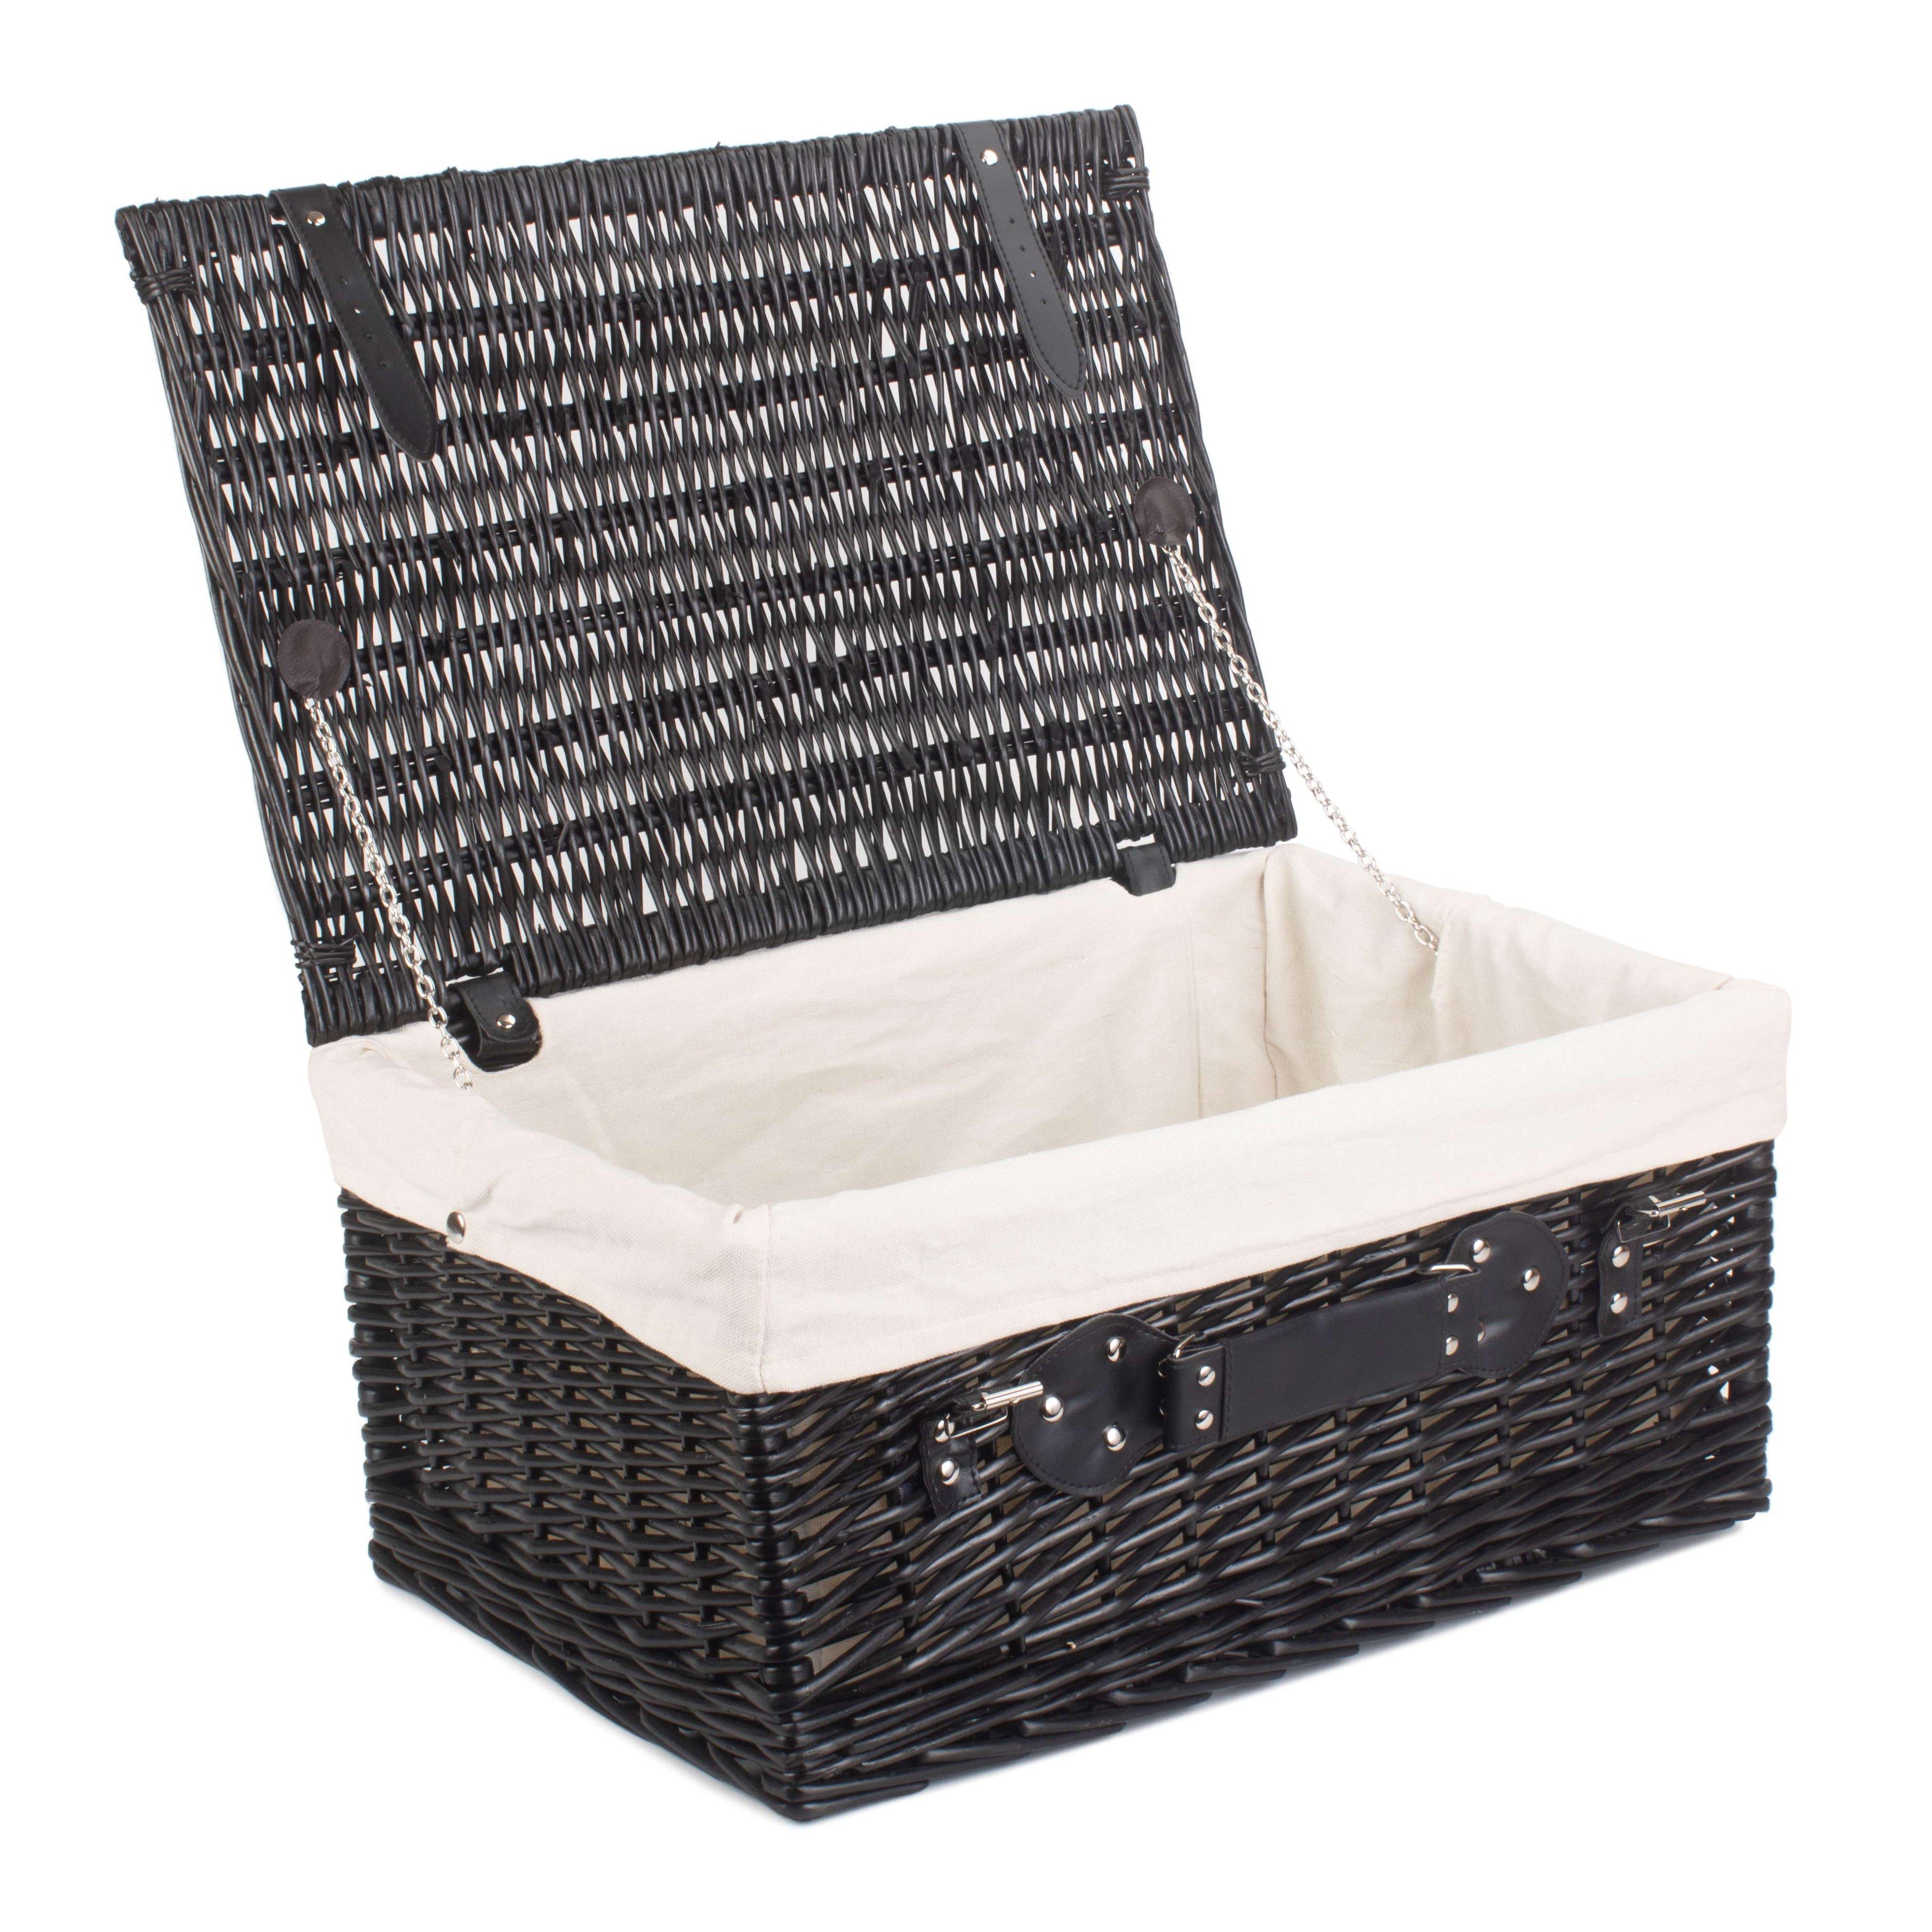 Wicker 51cm Empty Black Willow Picnic Basket with Cotton Lining